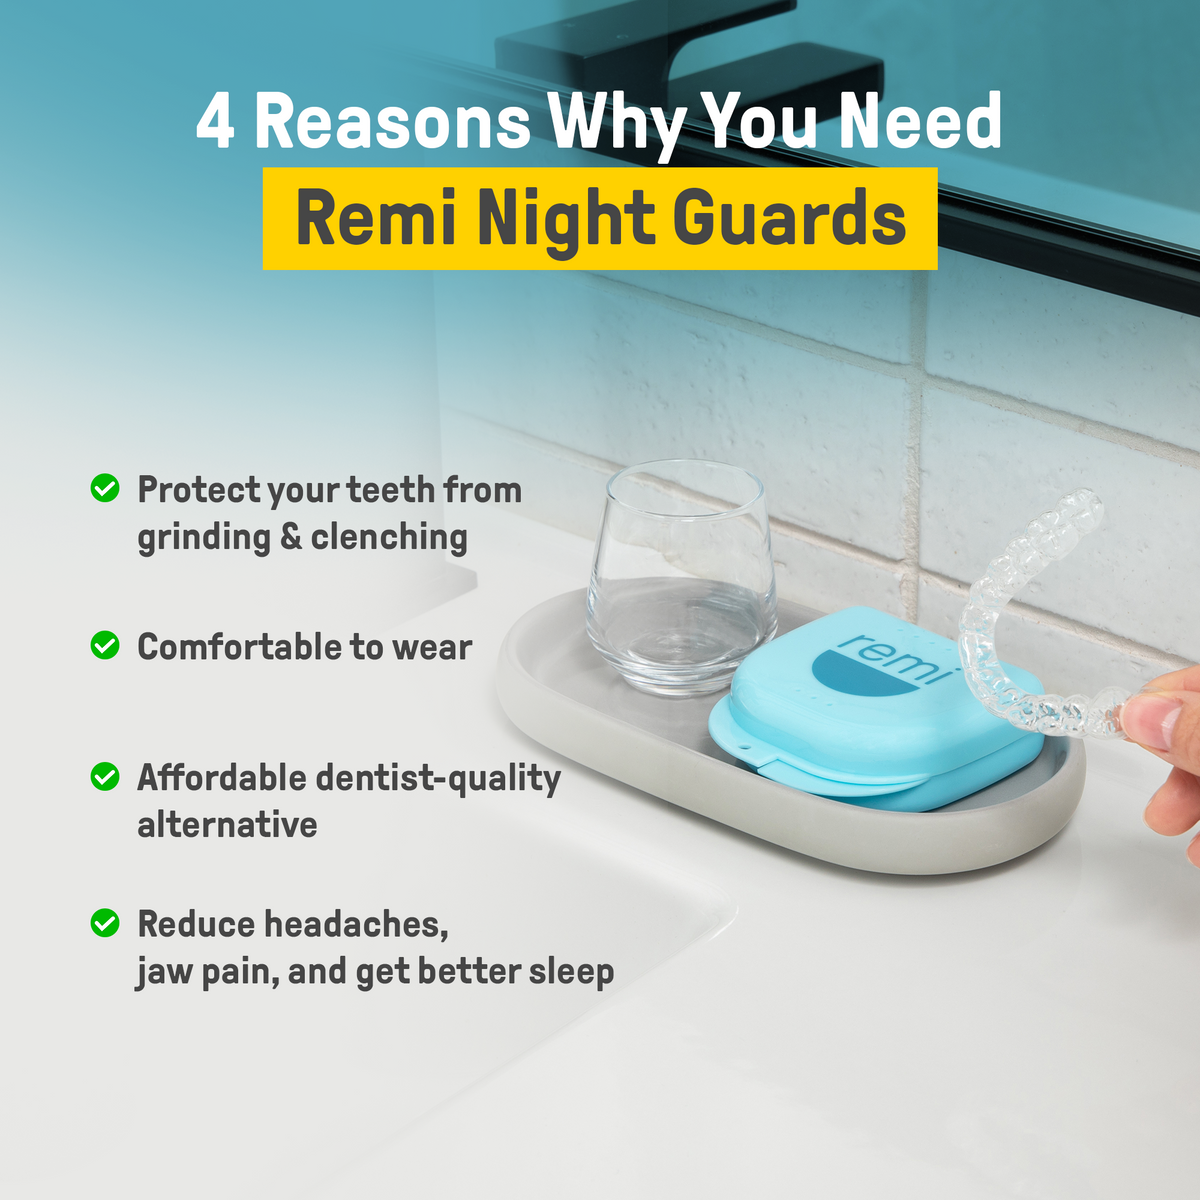 A dental-grade quality night guard is taken out of its teal and white case, placed next to an infographic explaining four benefits of using Custom Night Guards.